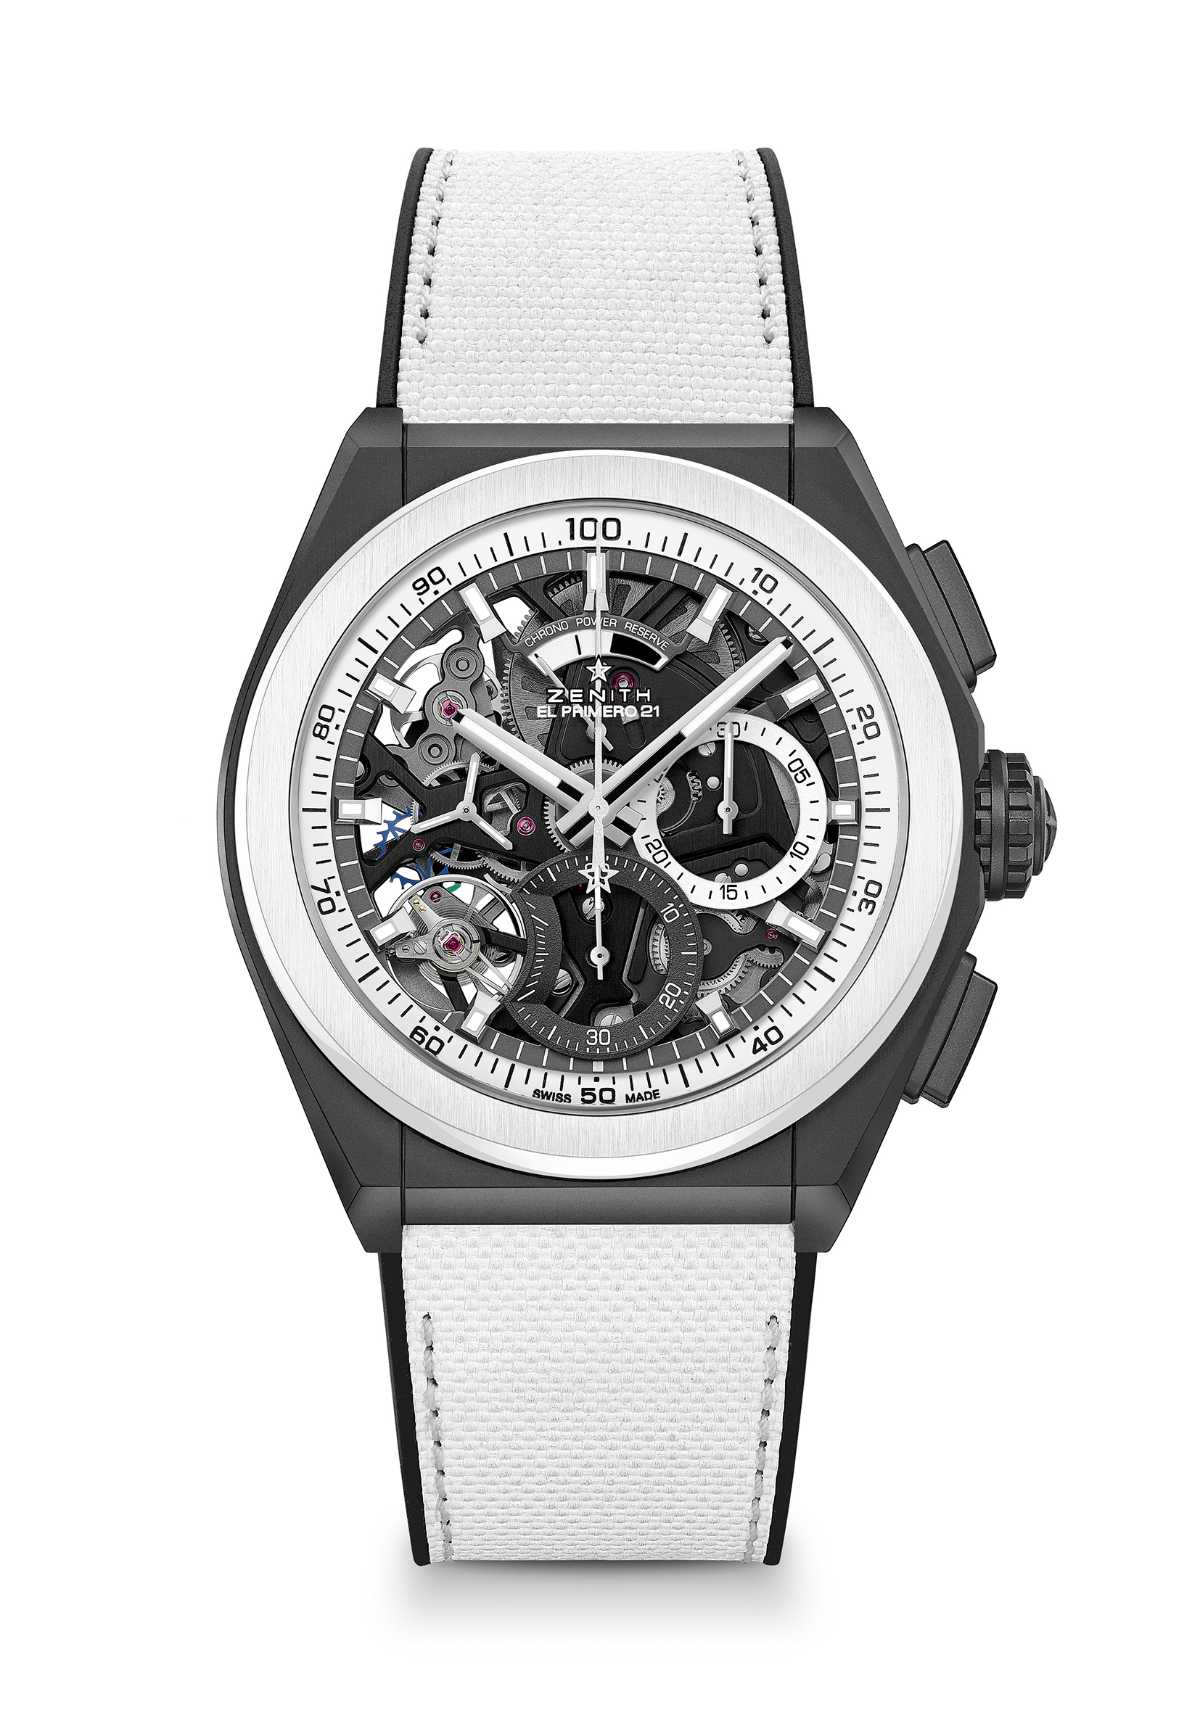 Zenith goes for strikingly bold contrast with the DEFY 21 and DEFY Classic Black & White